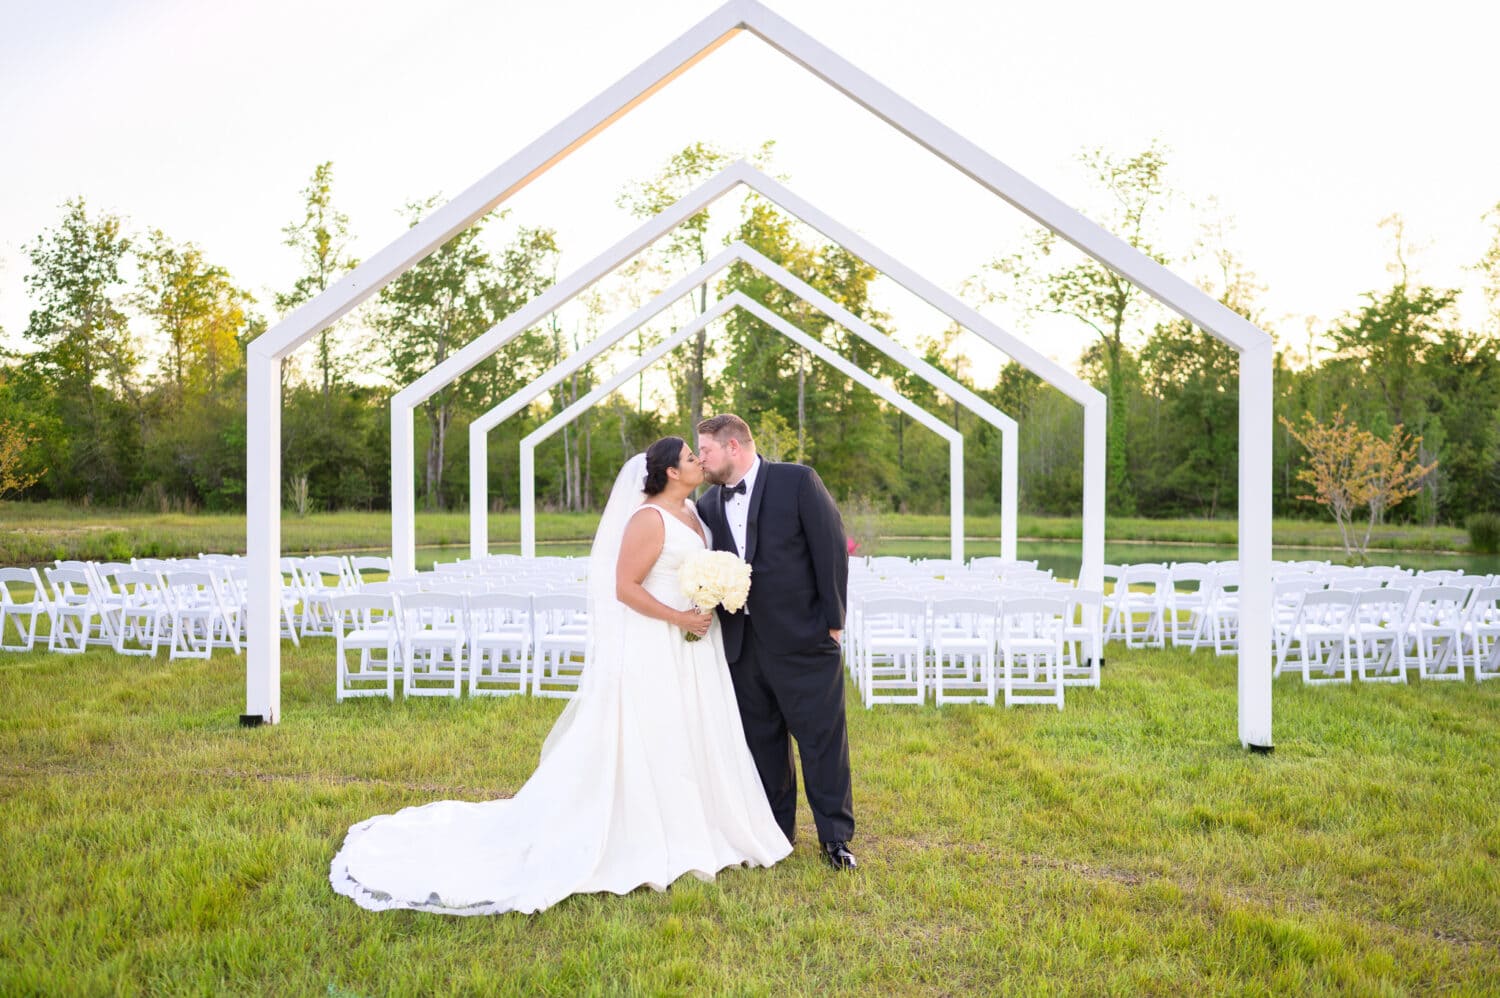 Wide angle kiss in front of the ceremony area at sunset - The Venue at White Oaks Farm